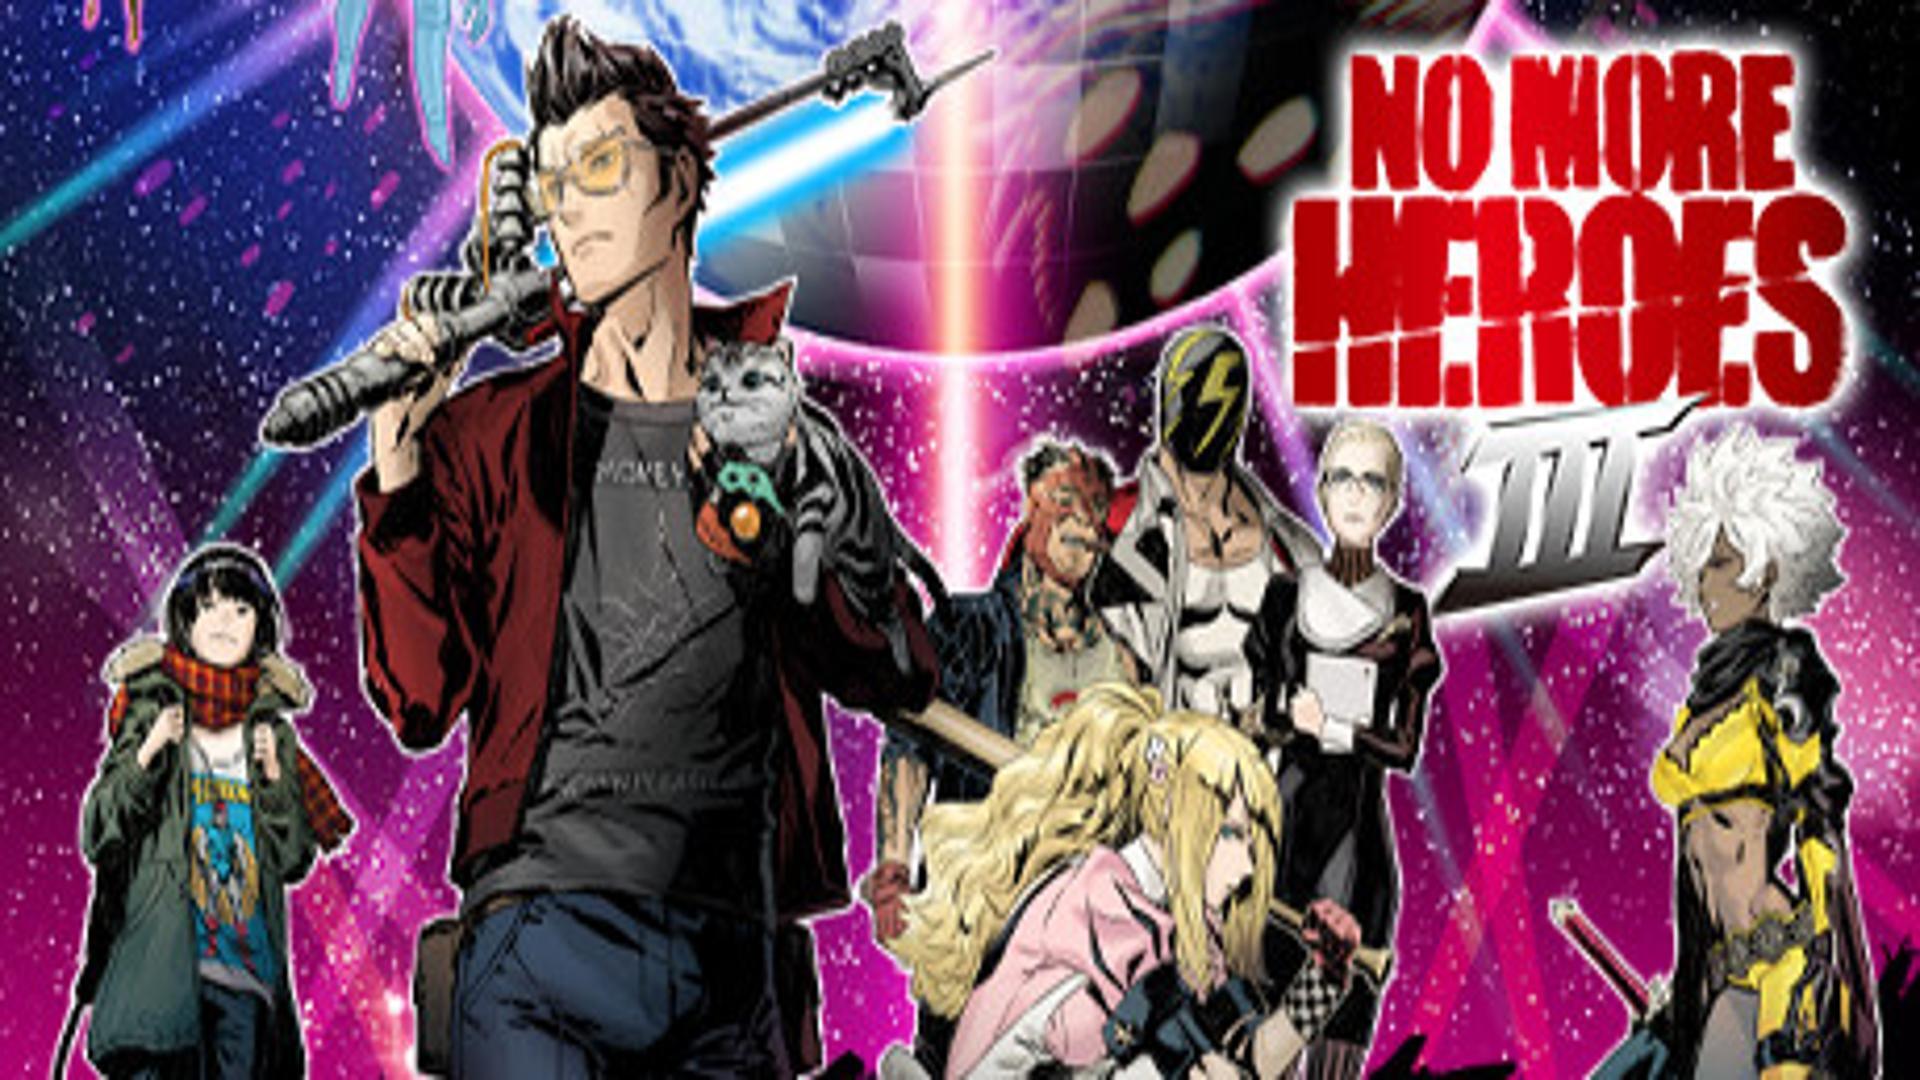 No More Heroes 3- Free Download (Build 11079788)